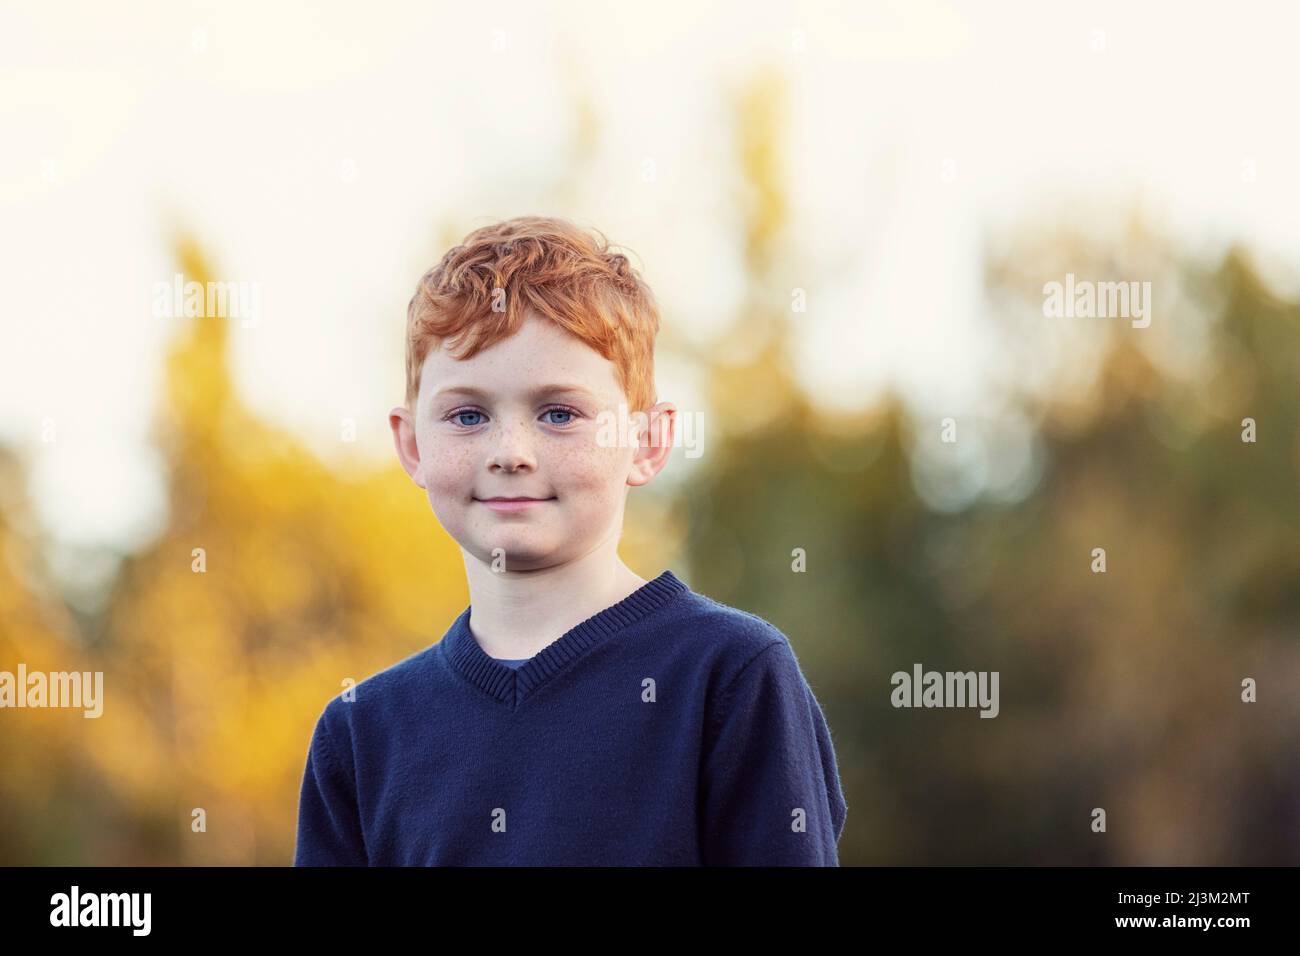 Outdoor portrait of boy with red hair and freckles and blurred autumn colours in the background; Edmonton, Alberta, Canada Stock Photo